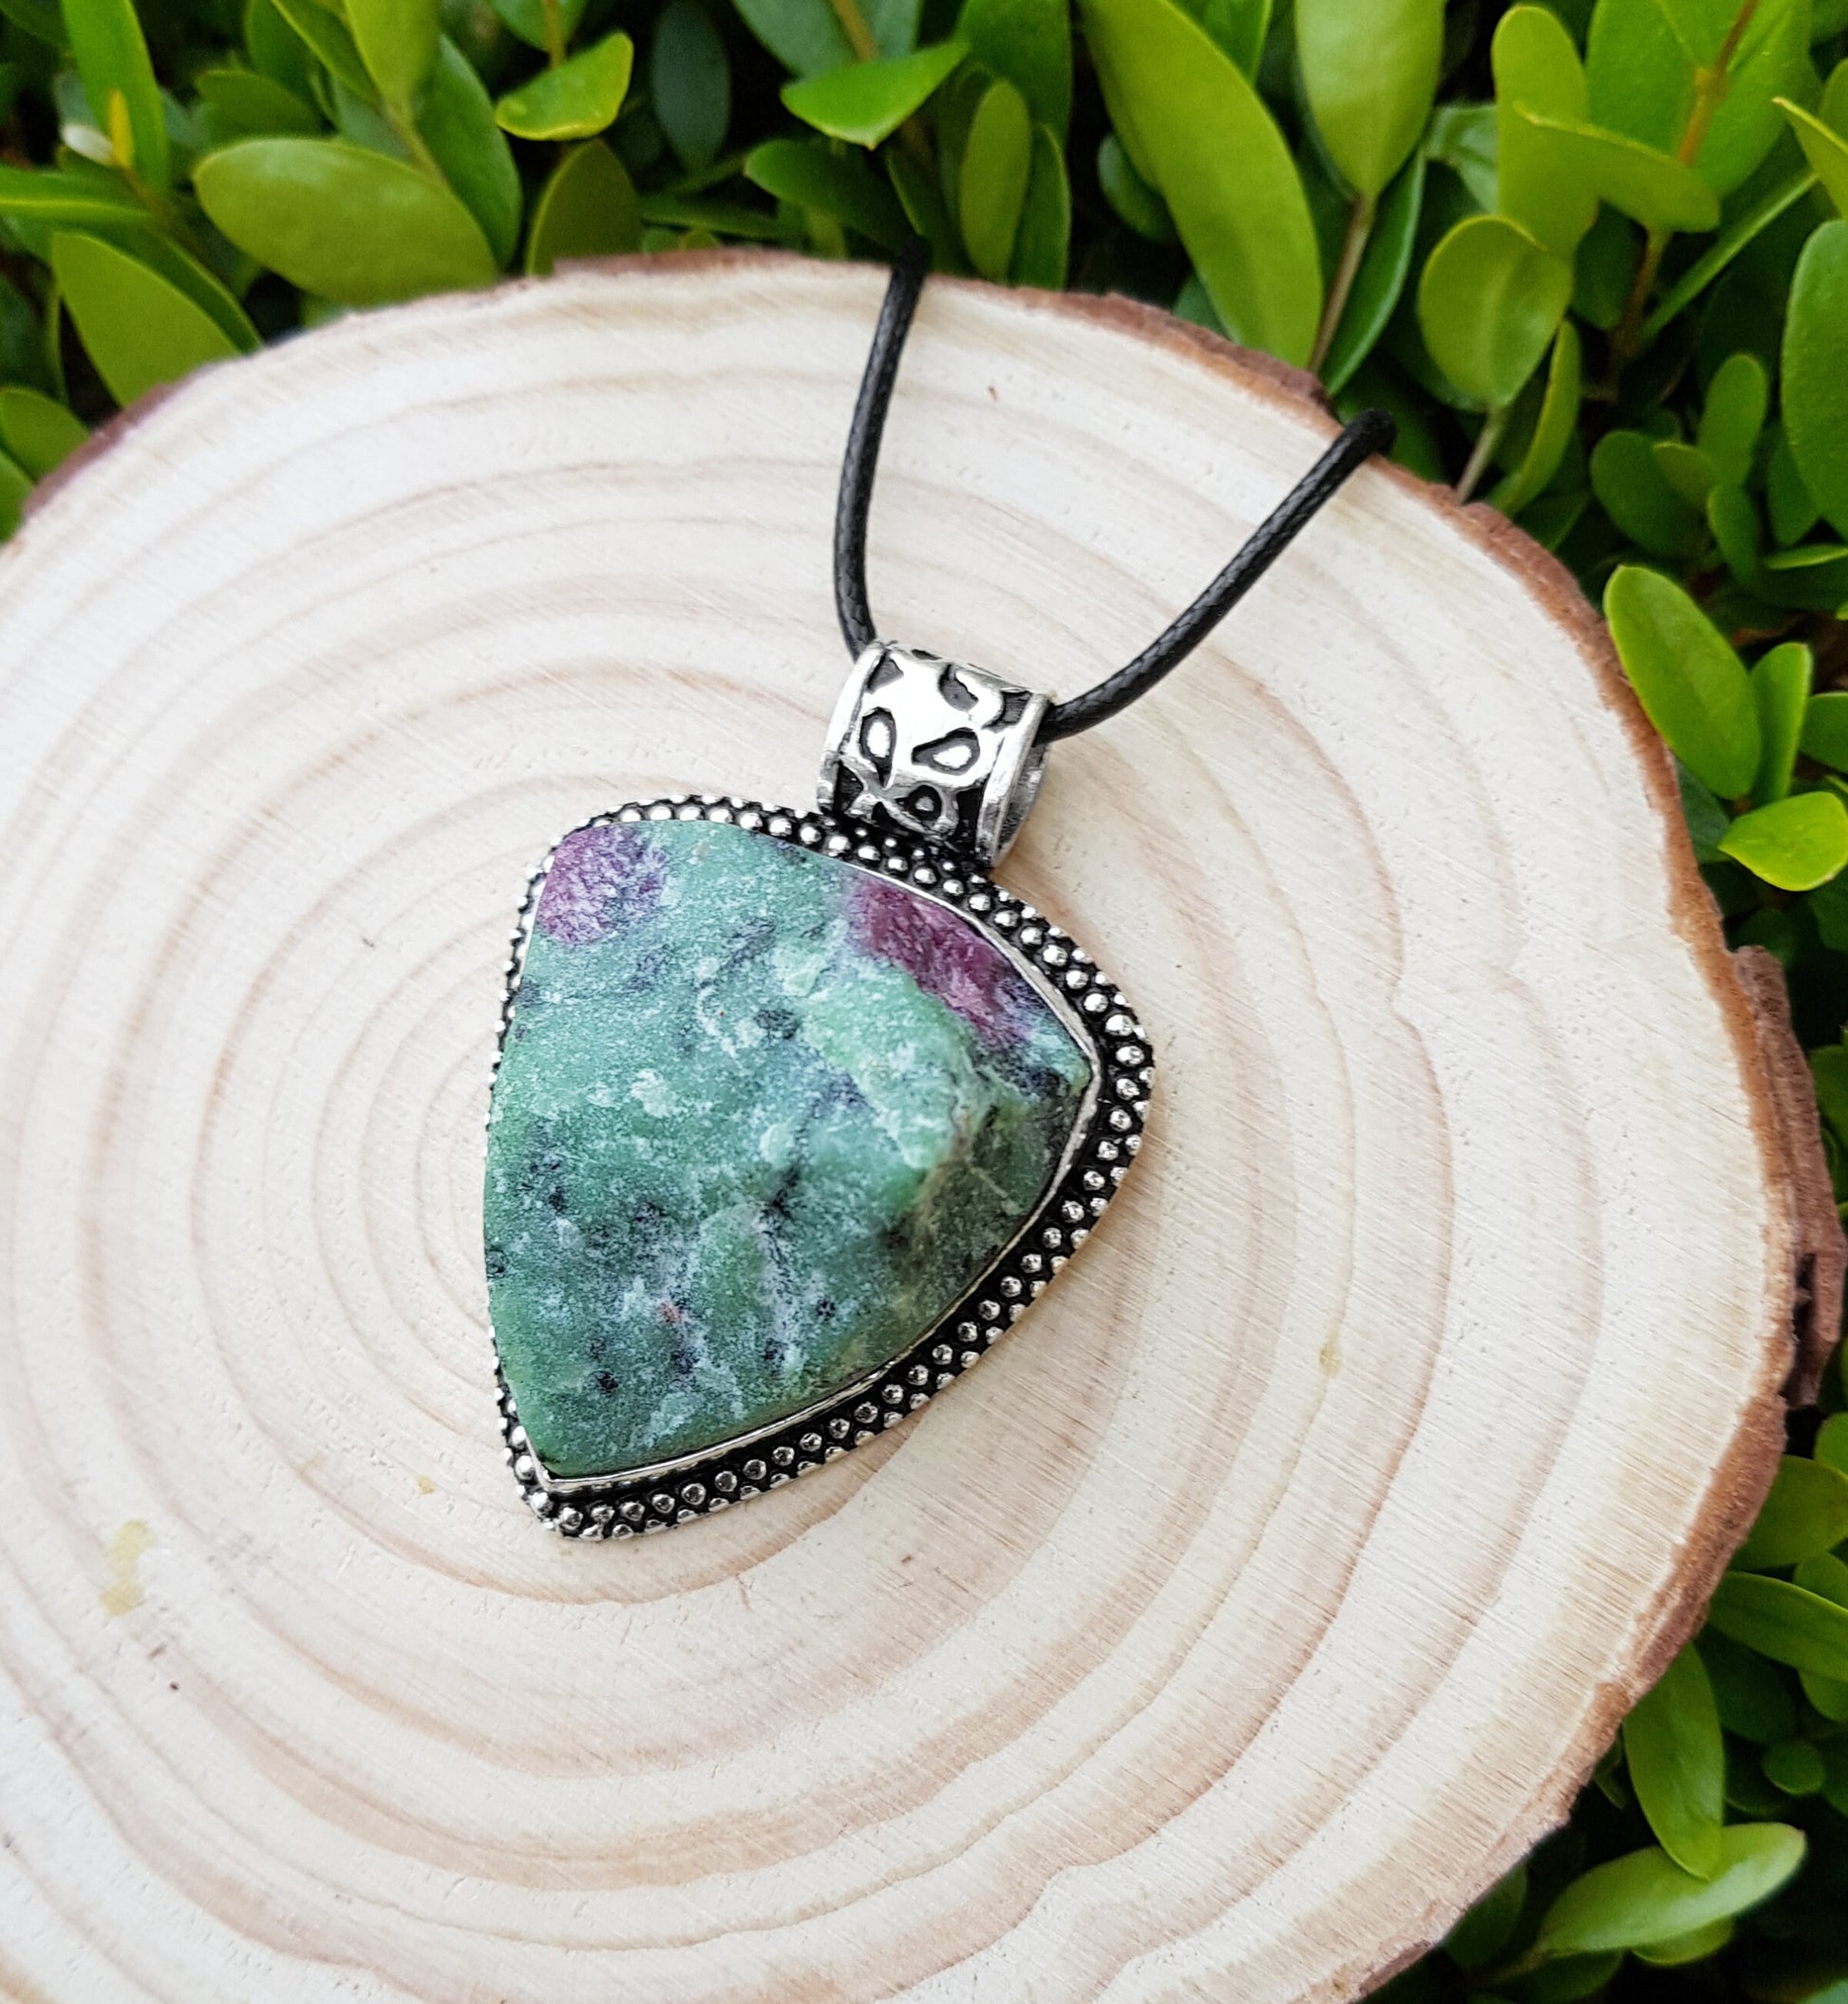 Raw Ruby Zoisite Pendant In Sterling Silver Statement Necklace Boho Gemstone Pendant One Of A Kind Gift Gypsy Jewellery